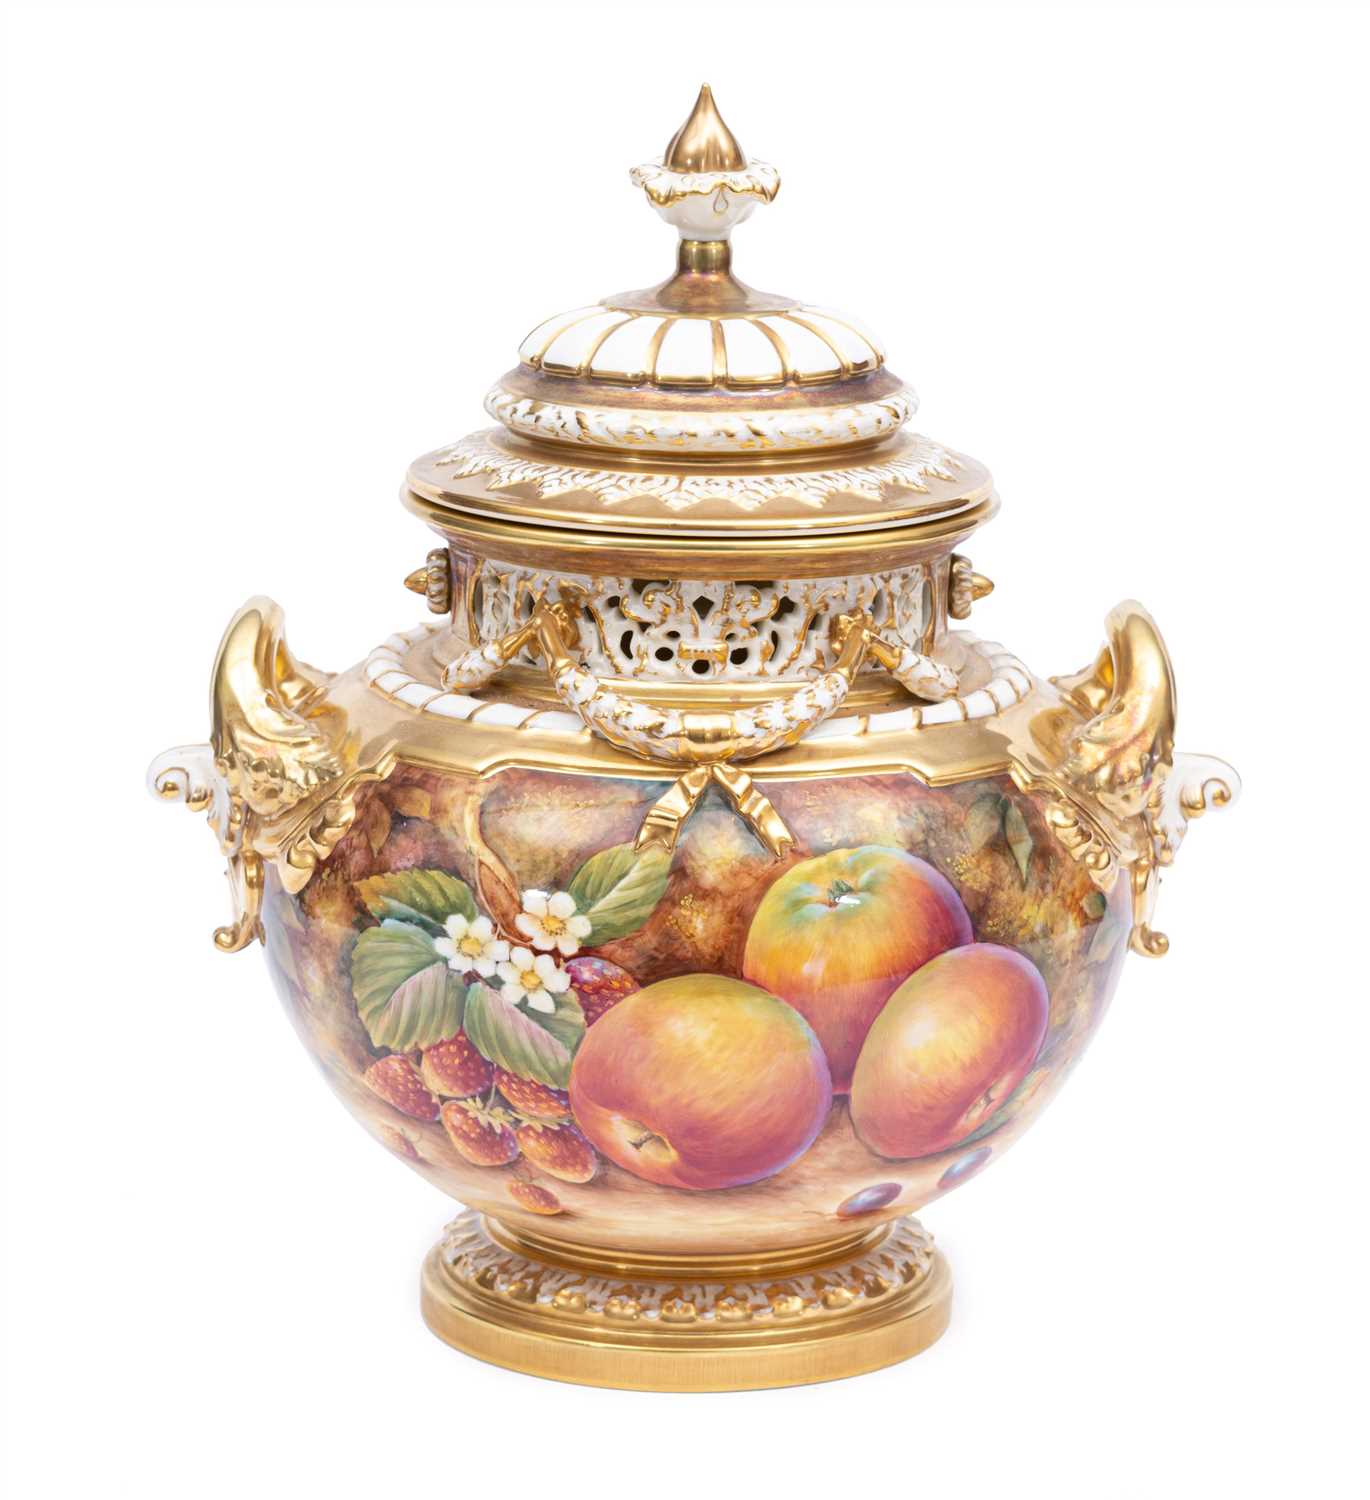 Lot 38 - A large 'Painted Fruit' pot pourri vase and cover, by David Fuller for Royal Worcester.